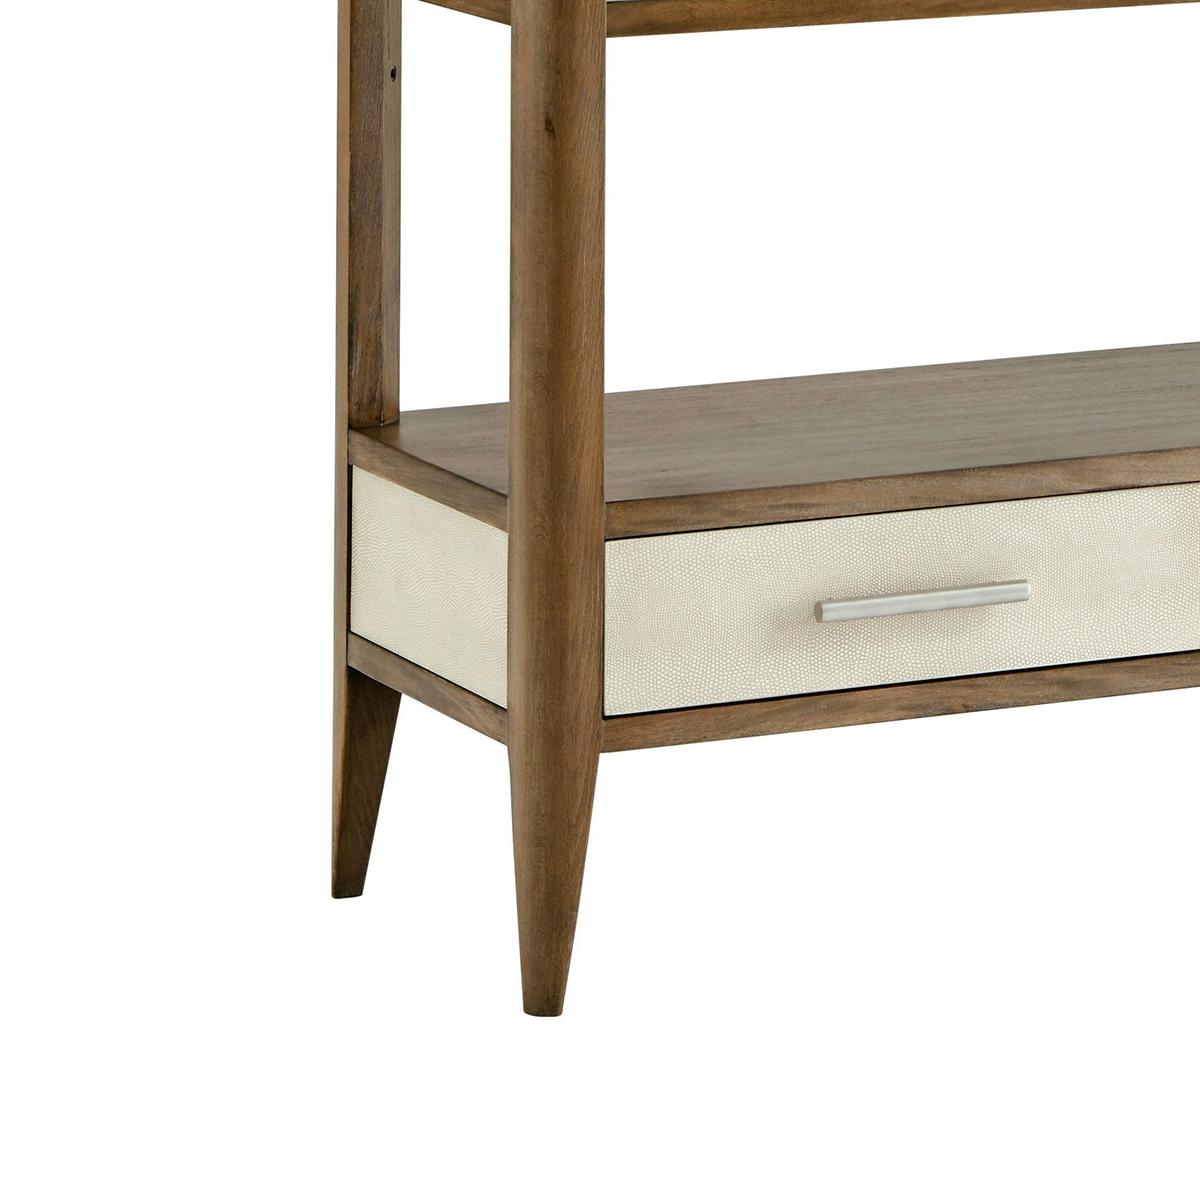 This contemporary etagere features five tiers, including three adjustable shelves that provide flexible storage solutions for books and decor.

Constructed from high-quality Beech and Primavera veneer, the etagere boasts our light mangrove finish